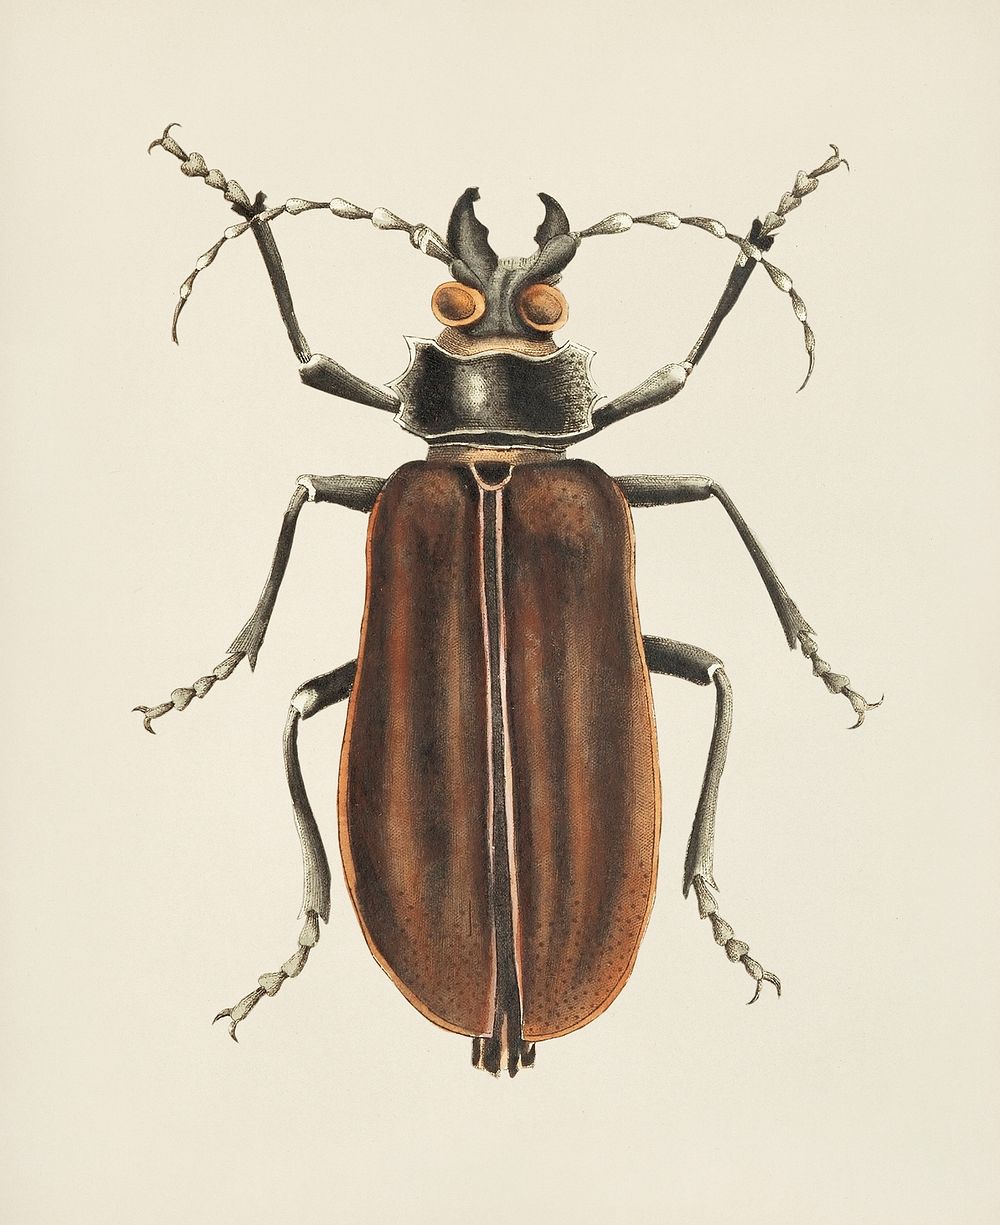 Great cerambyx or Black cerambyx illustration from The Naturalist's Miscellany (1789-1813) by George Shaw (1751-1813)